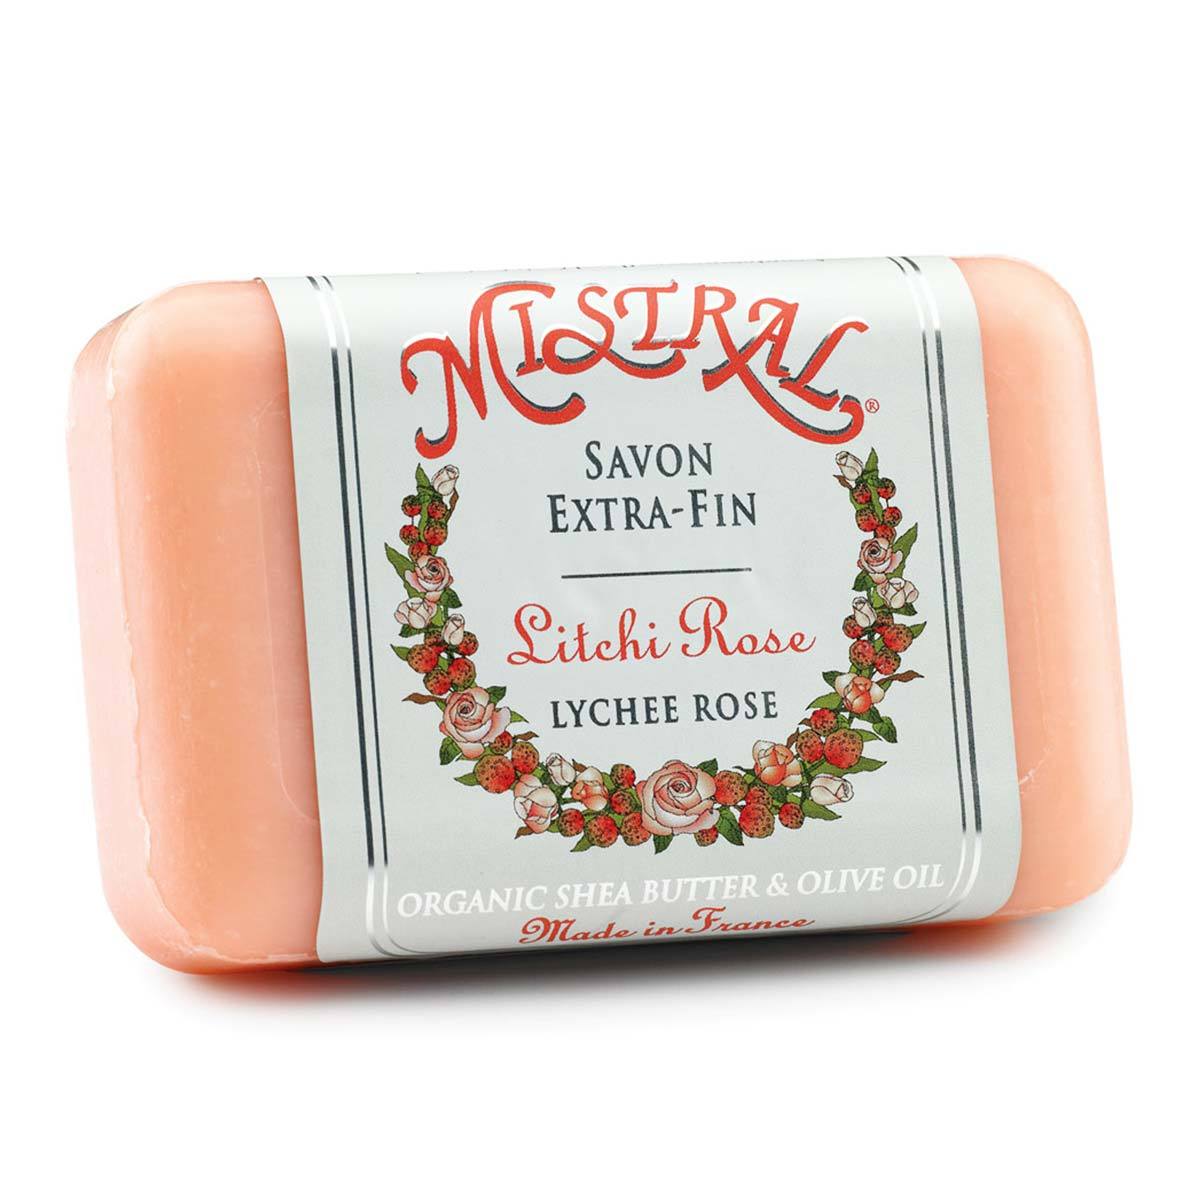 Primary image of Lychee Rose Soap